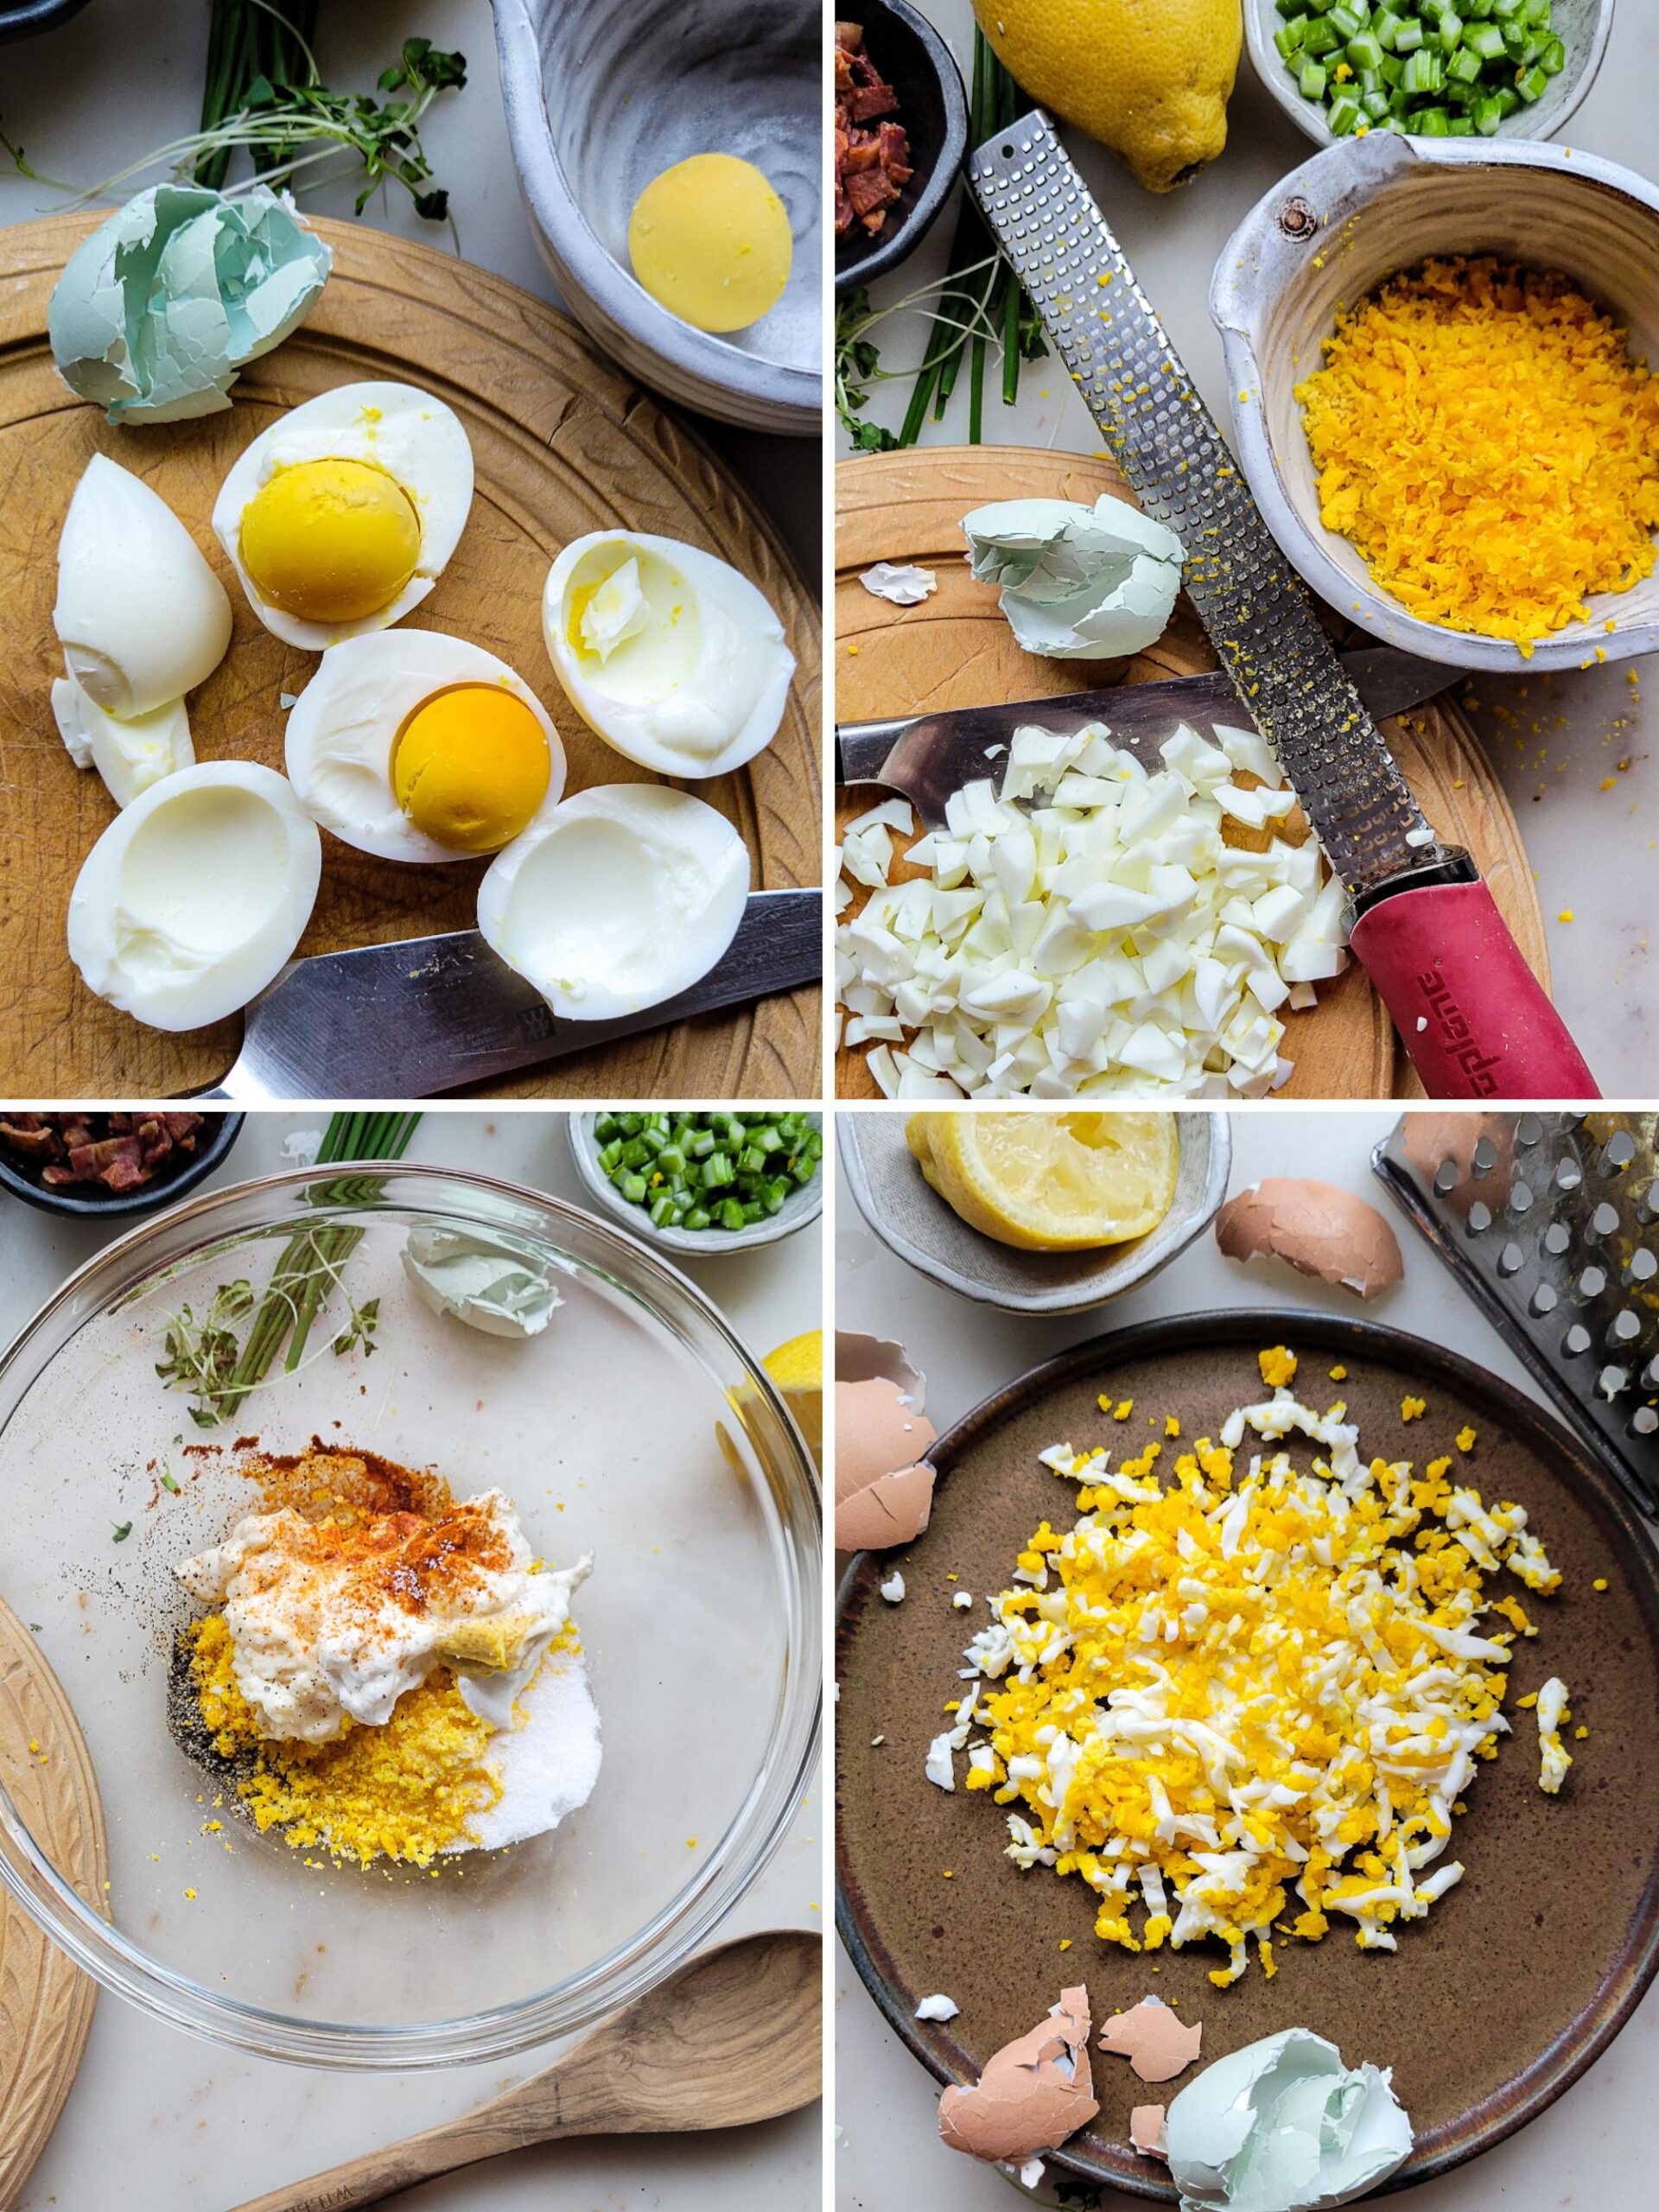 Collage showing the assembling and preparing of the eggs for a Mimosa Egg Pasta Salad.